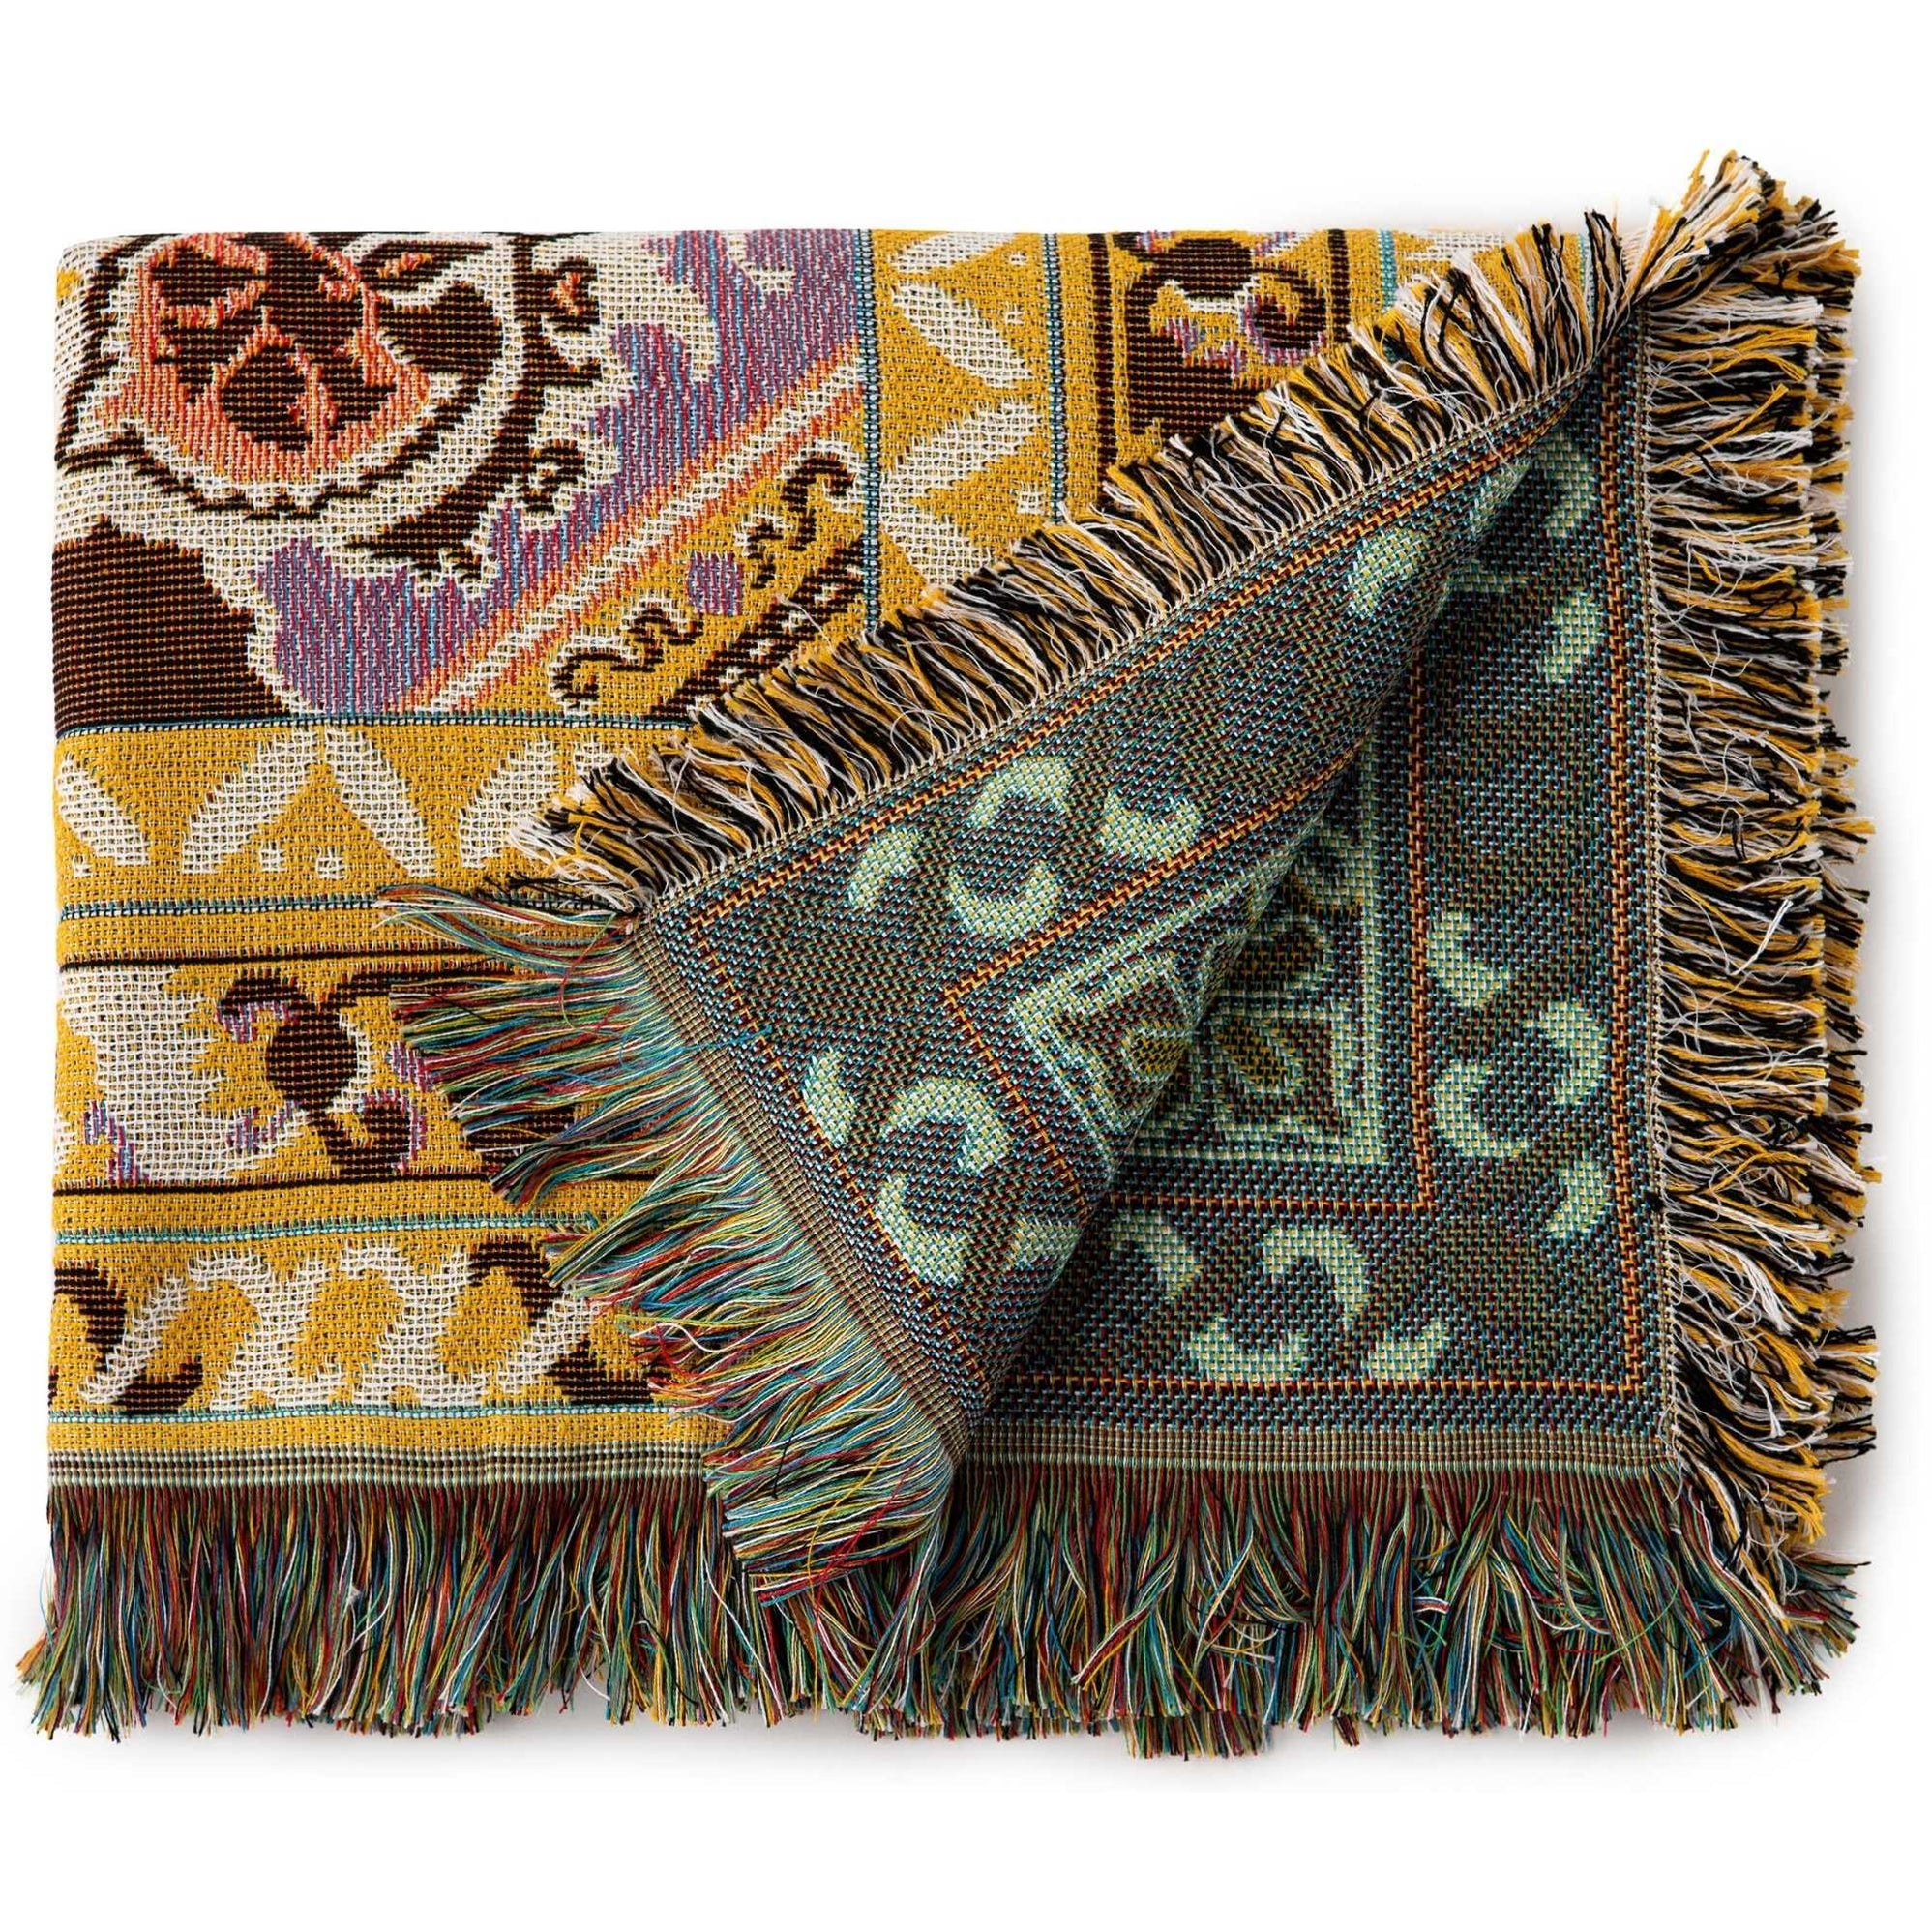 Here Comes The Sun' Woven Cotton Throw Rug Picnic Blanket – Hendeer